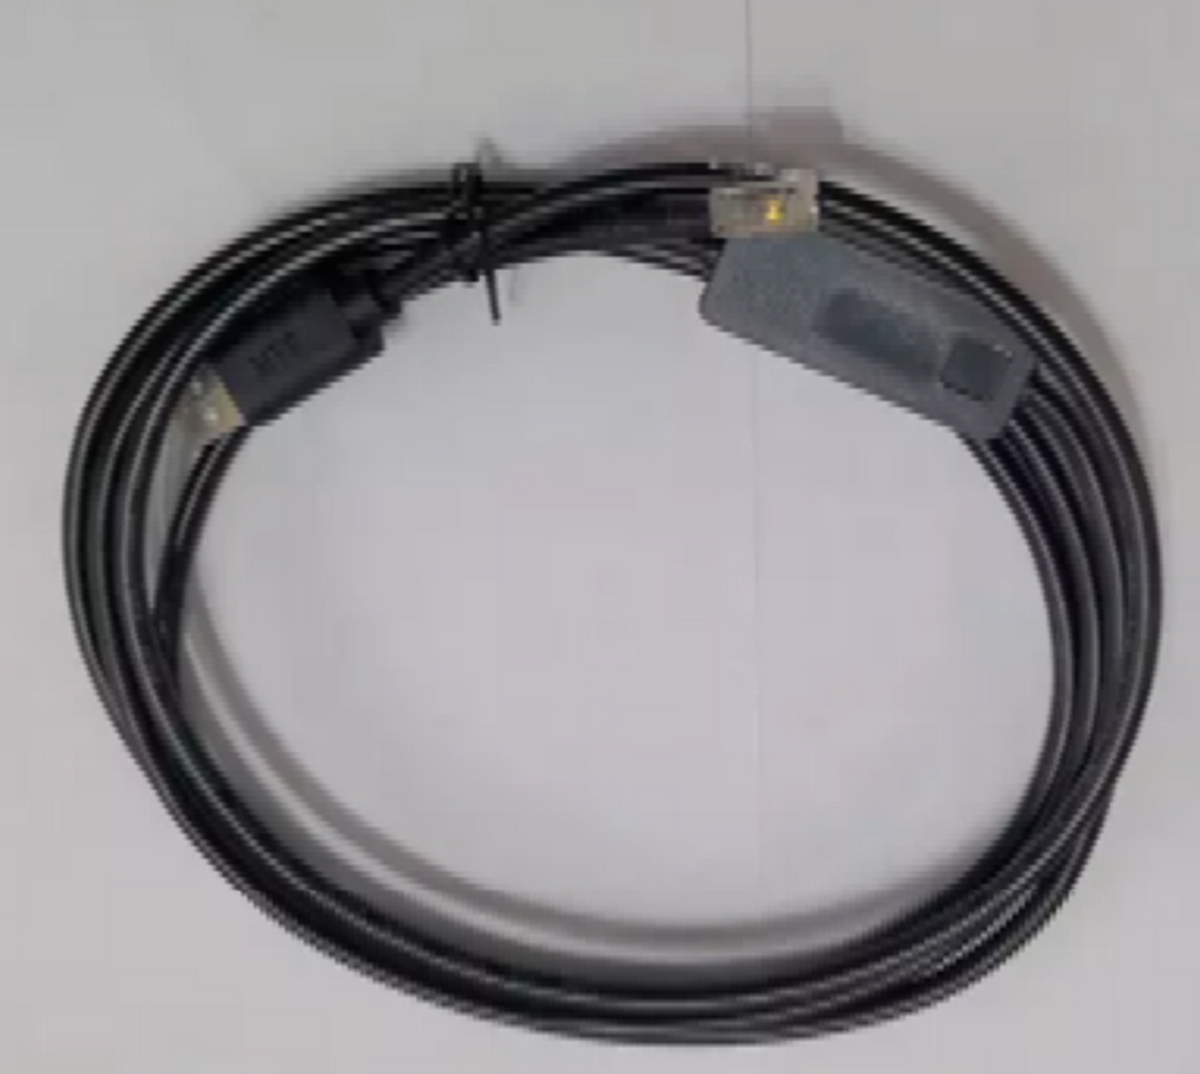 USB-NPCU-01 Debugging Cable USB Download Cable For ABB